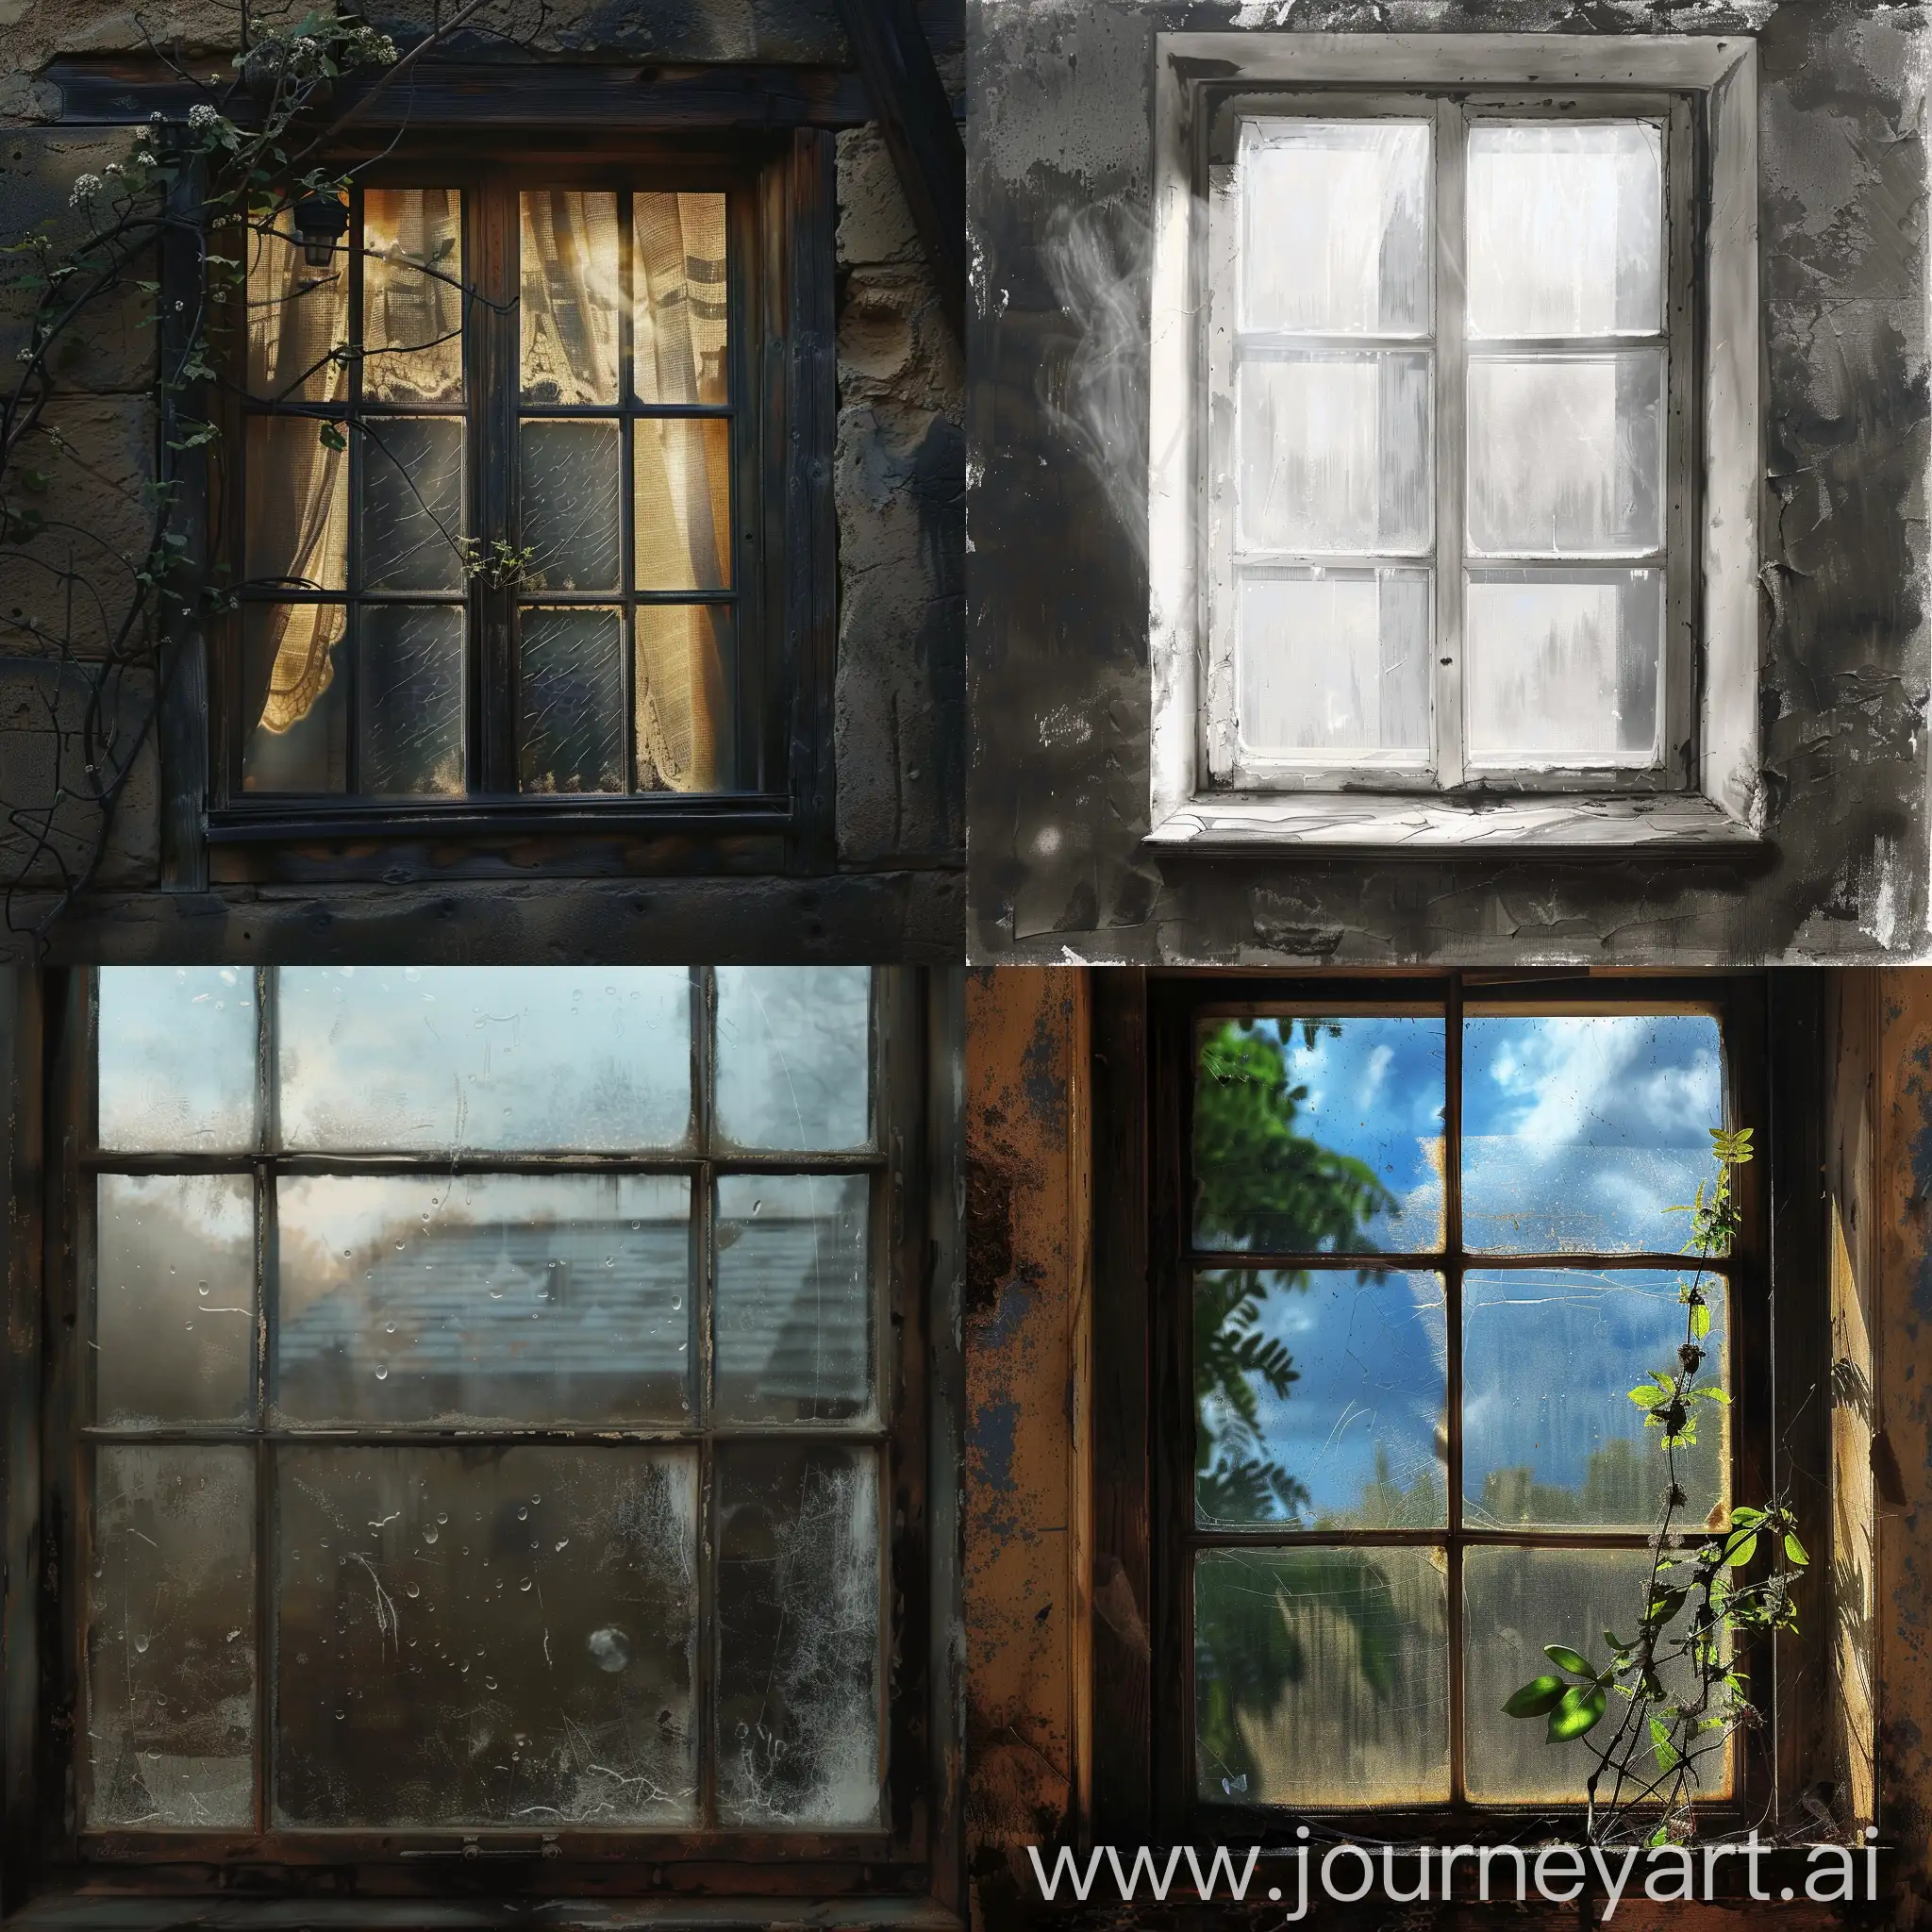 A whistling window, photorealistic